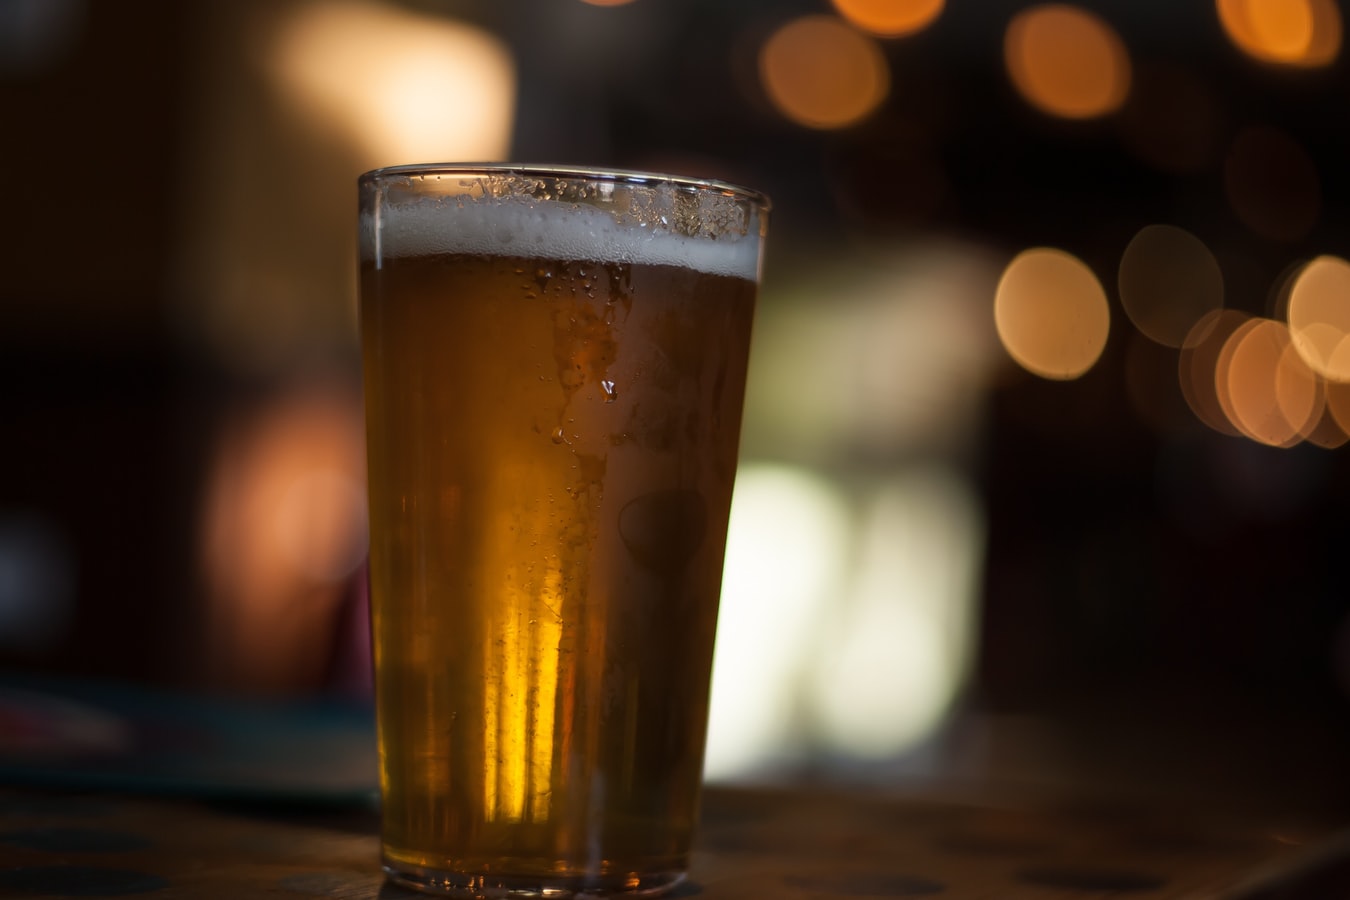 A pint of beer. The legal limit of alcohol in the state of Indiana is 0.08